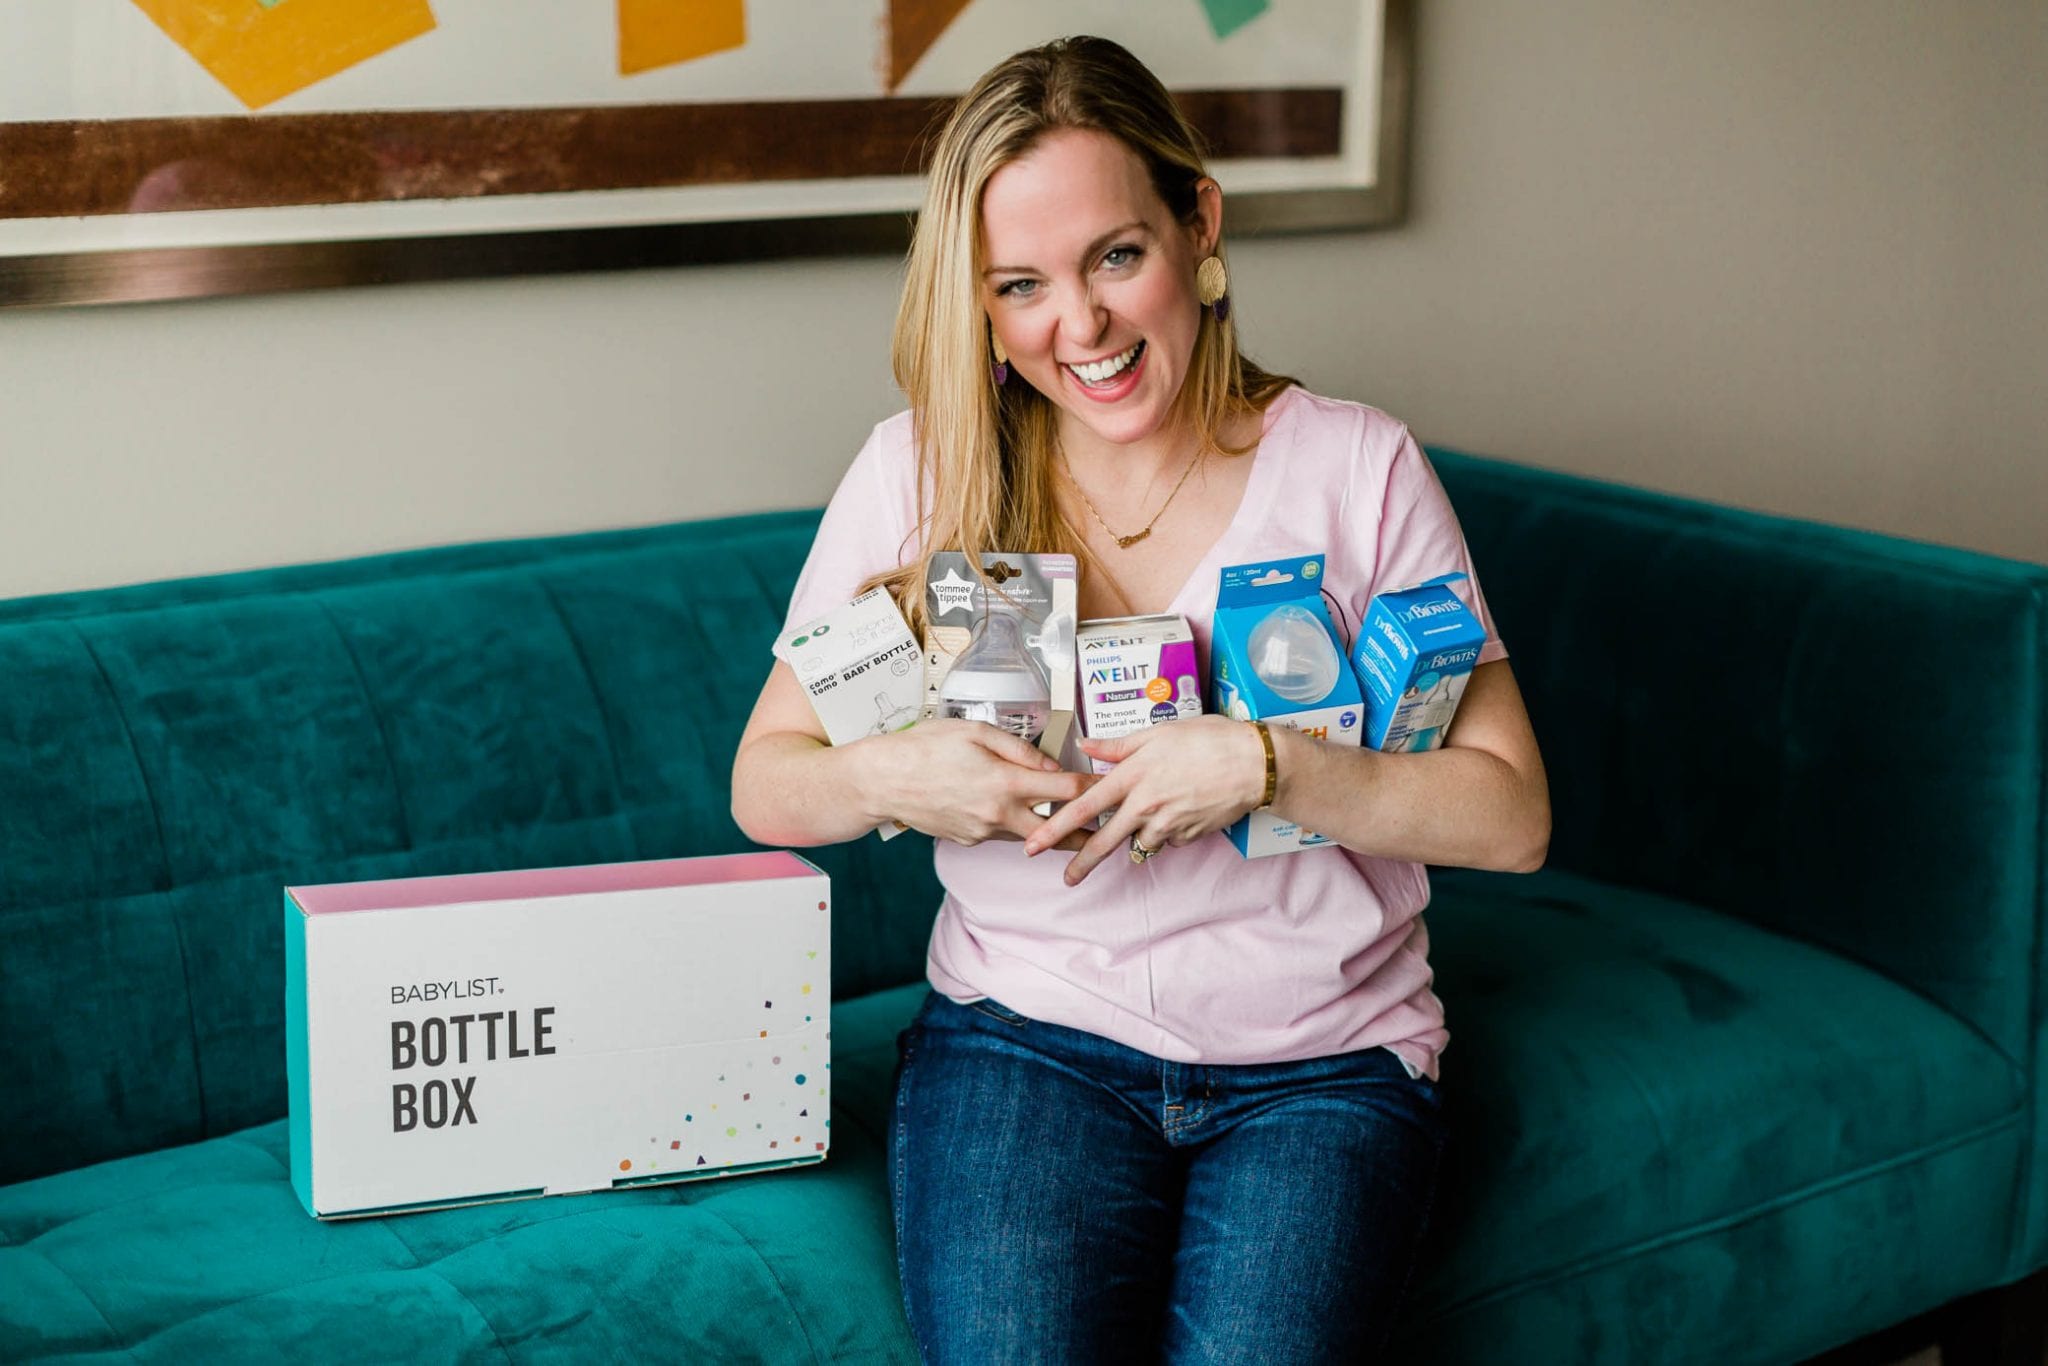 Finding the Right Bottle for Your Baby with the Babylist Bottle Box